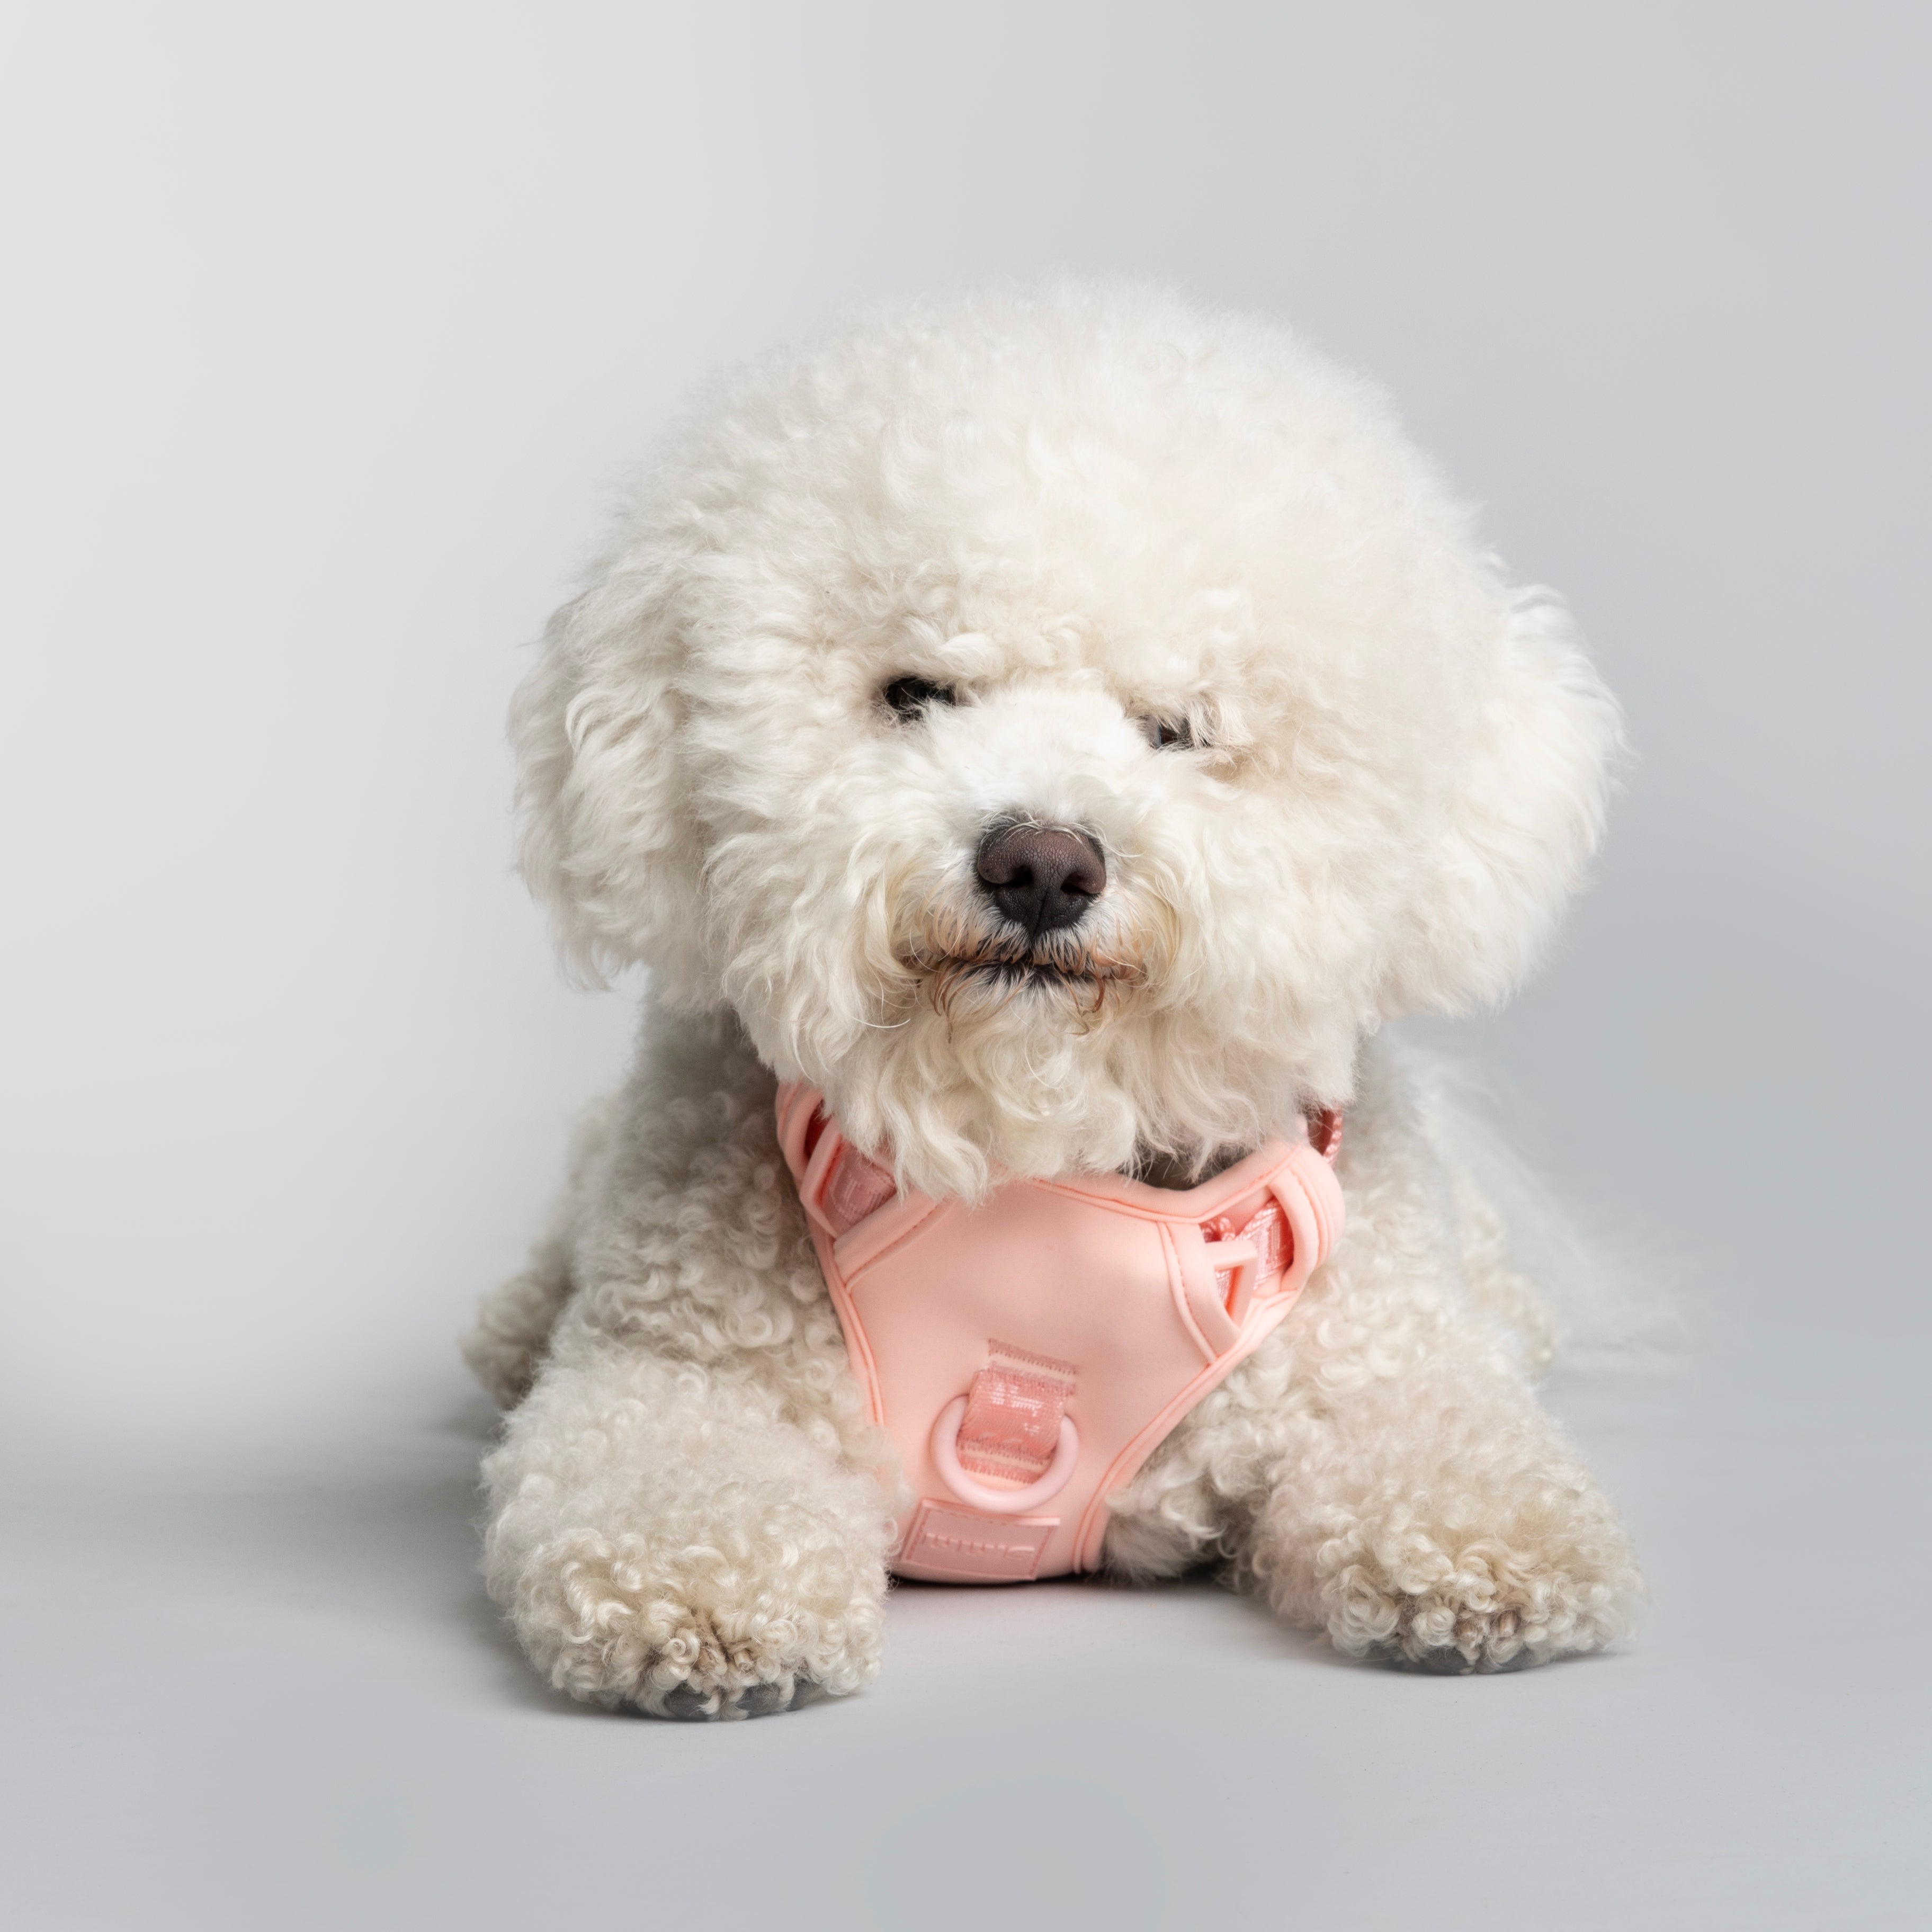  a fluffy white dog with a curly coat, lying down on a light gray surface. The dog is wearing a Blush Pink harness from Lulu's brand, which fits comfortably around its body. The dog has a calm and relaxed expression, looking directly at the camera. The background is plain and light, ensuring that the focus remains on the dog and its harness